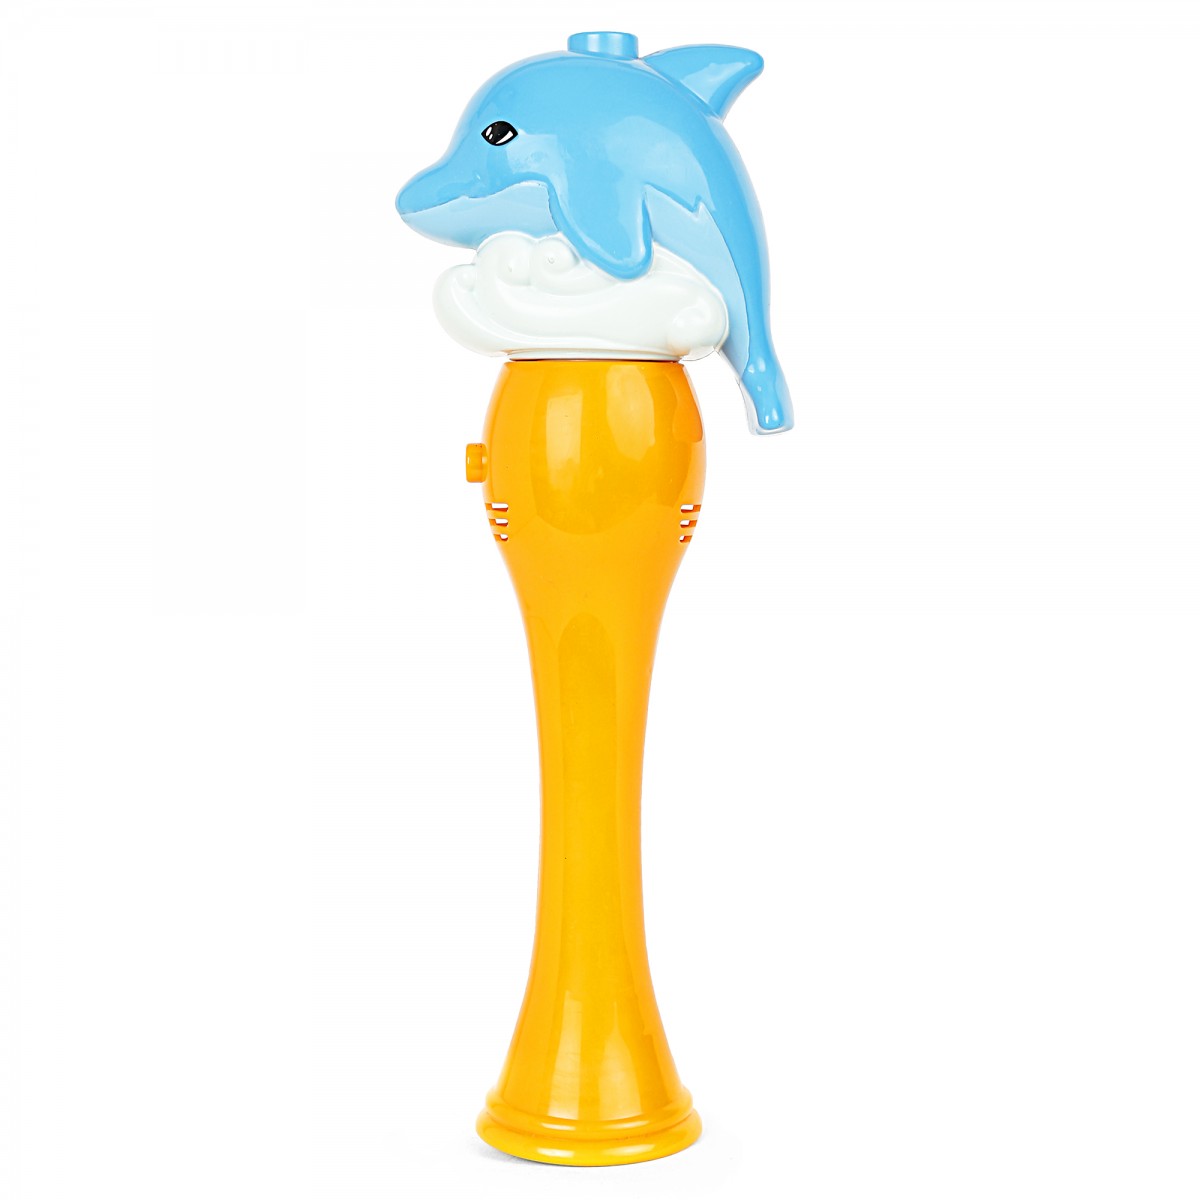 Bubble Blower Dolphin Bubble Play Toys For Kids Age 3Y+